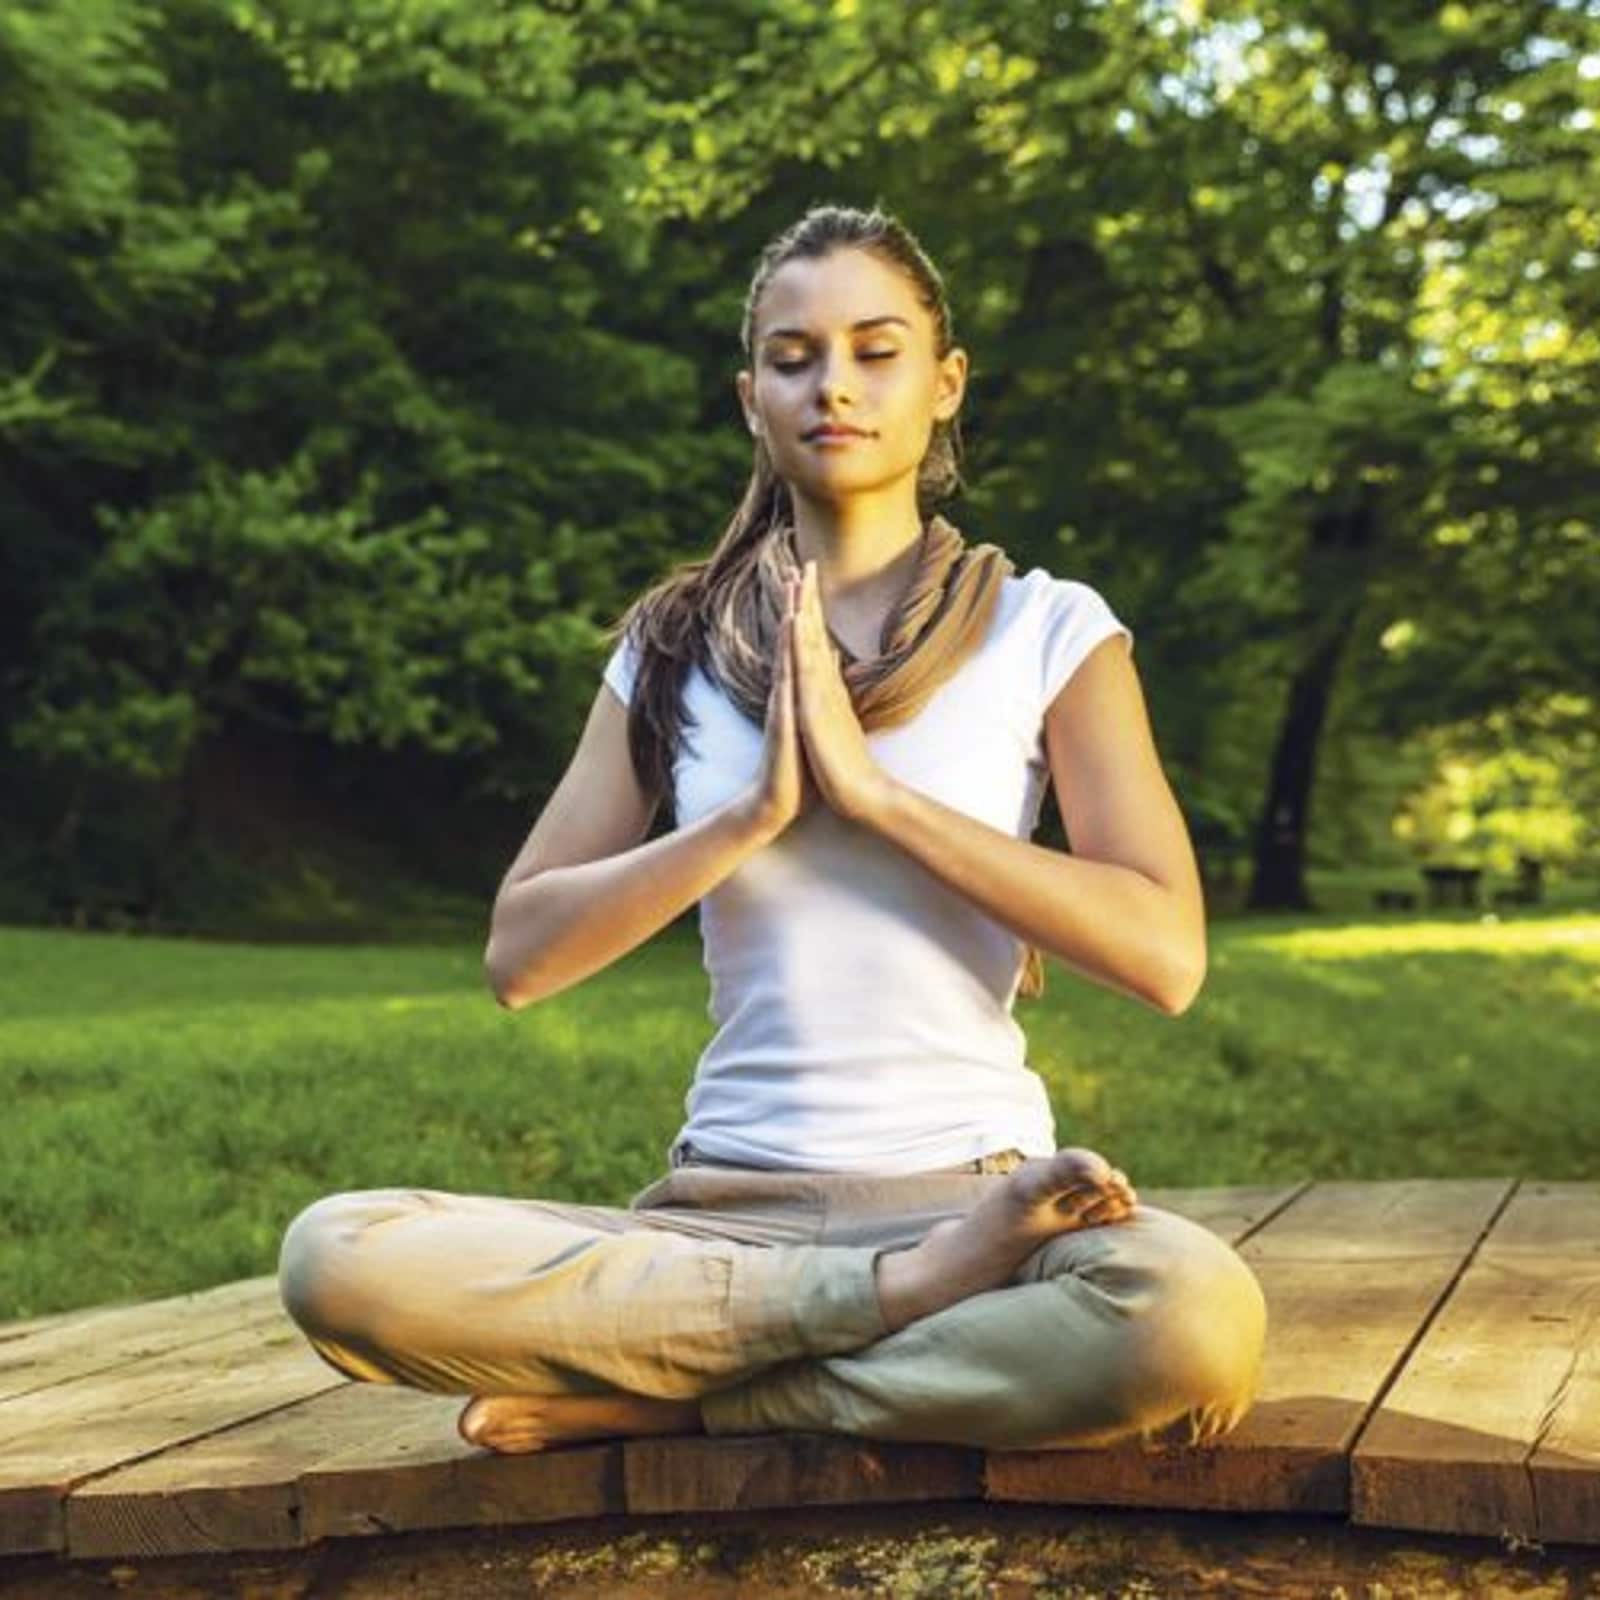 Morning meditation is crucial for easing anxiety in the morning.